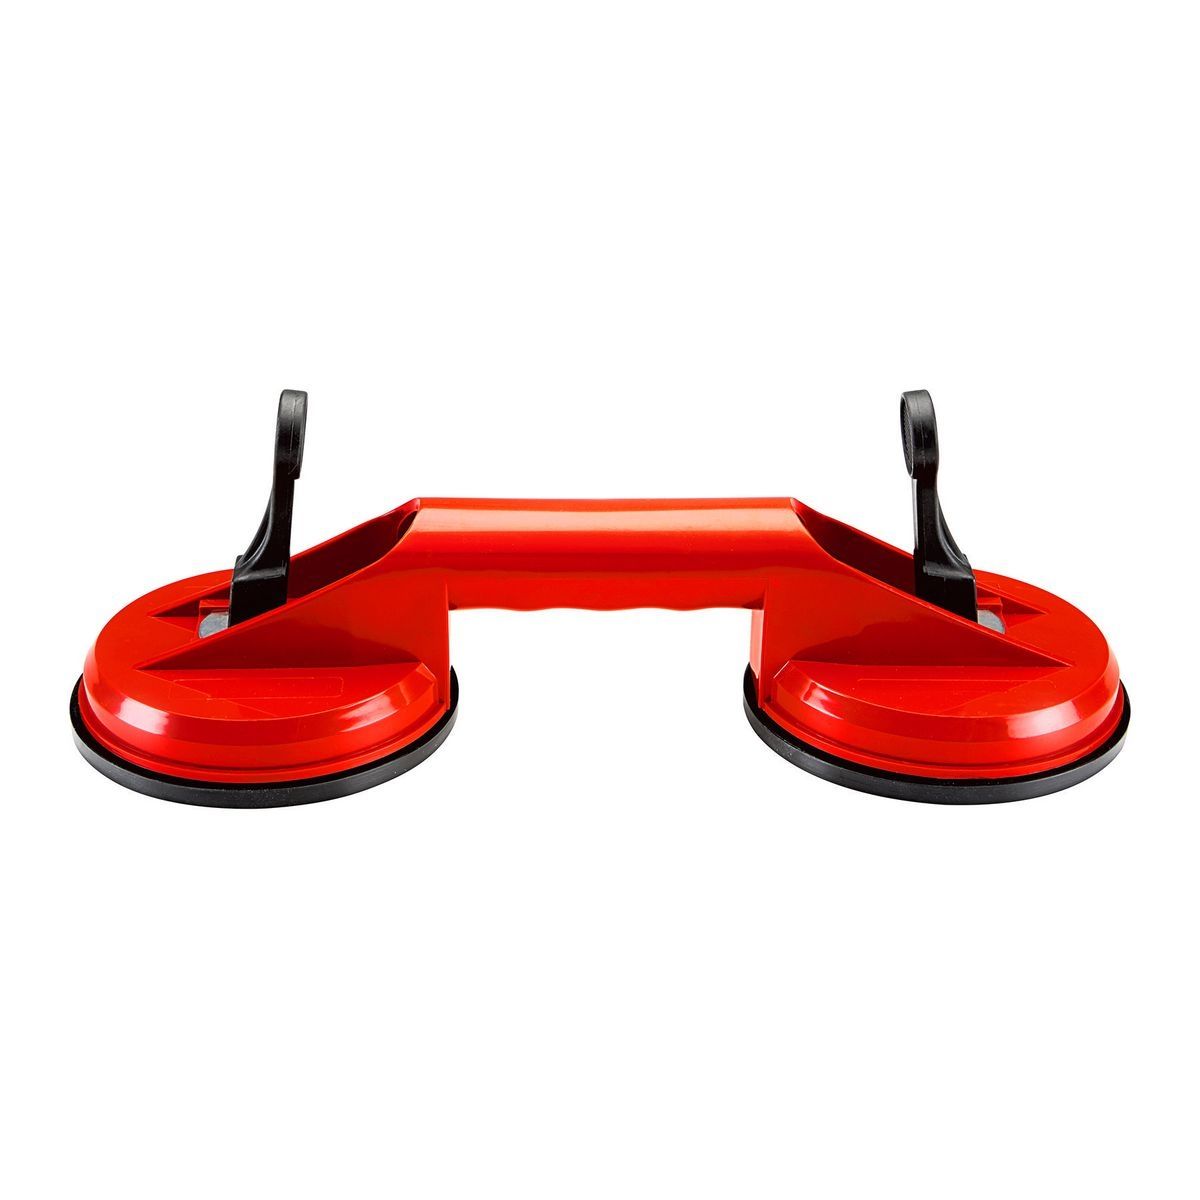 LAGUNA 4-2/3 in., 125 lb. Dual Suction Cup Lifter